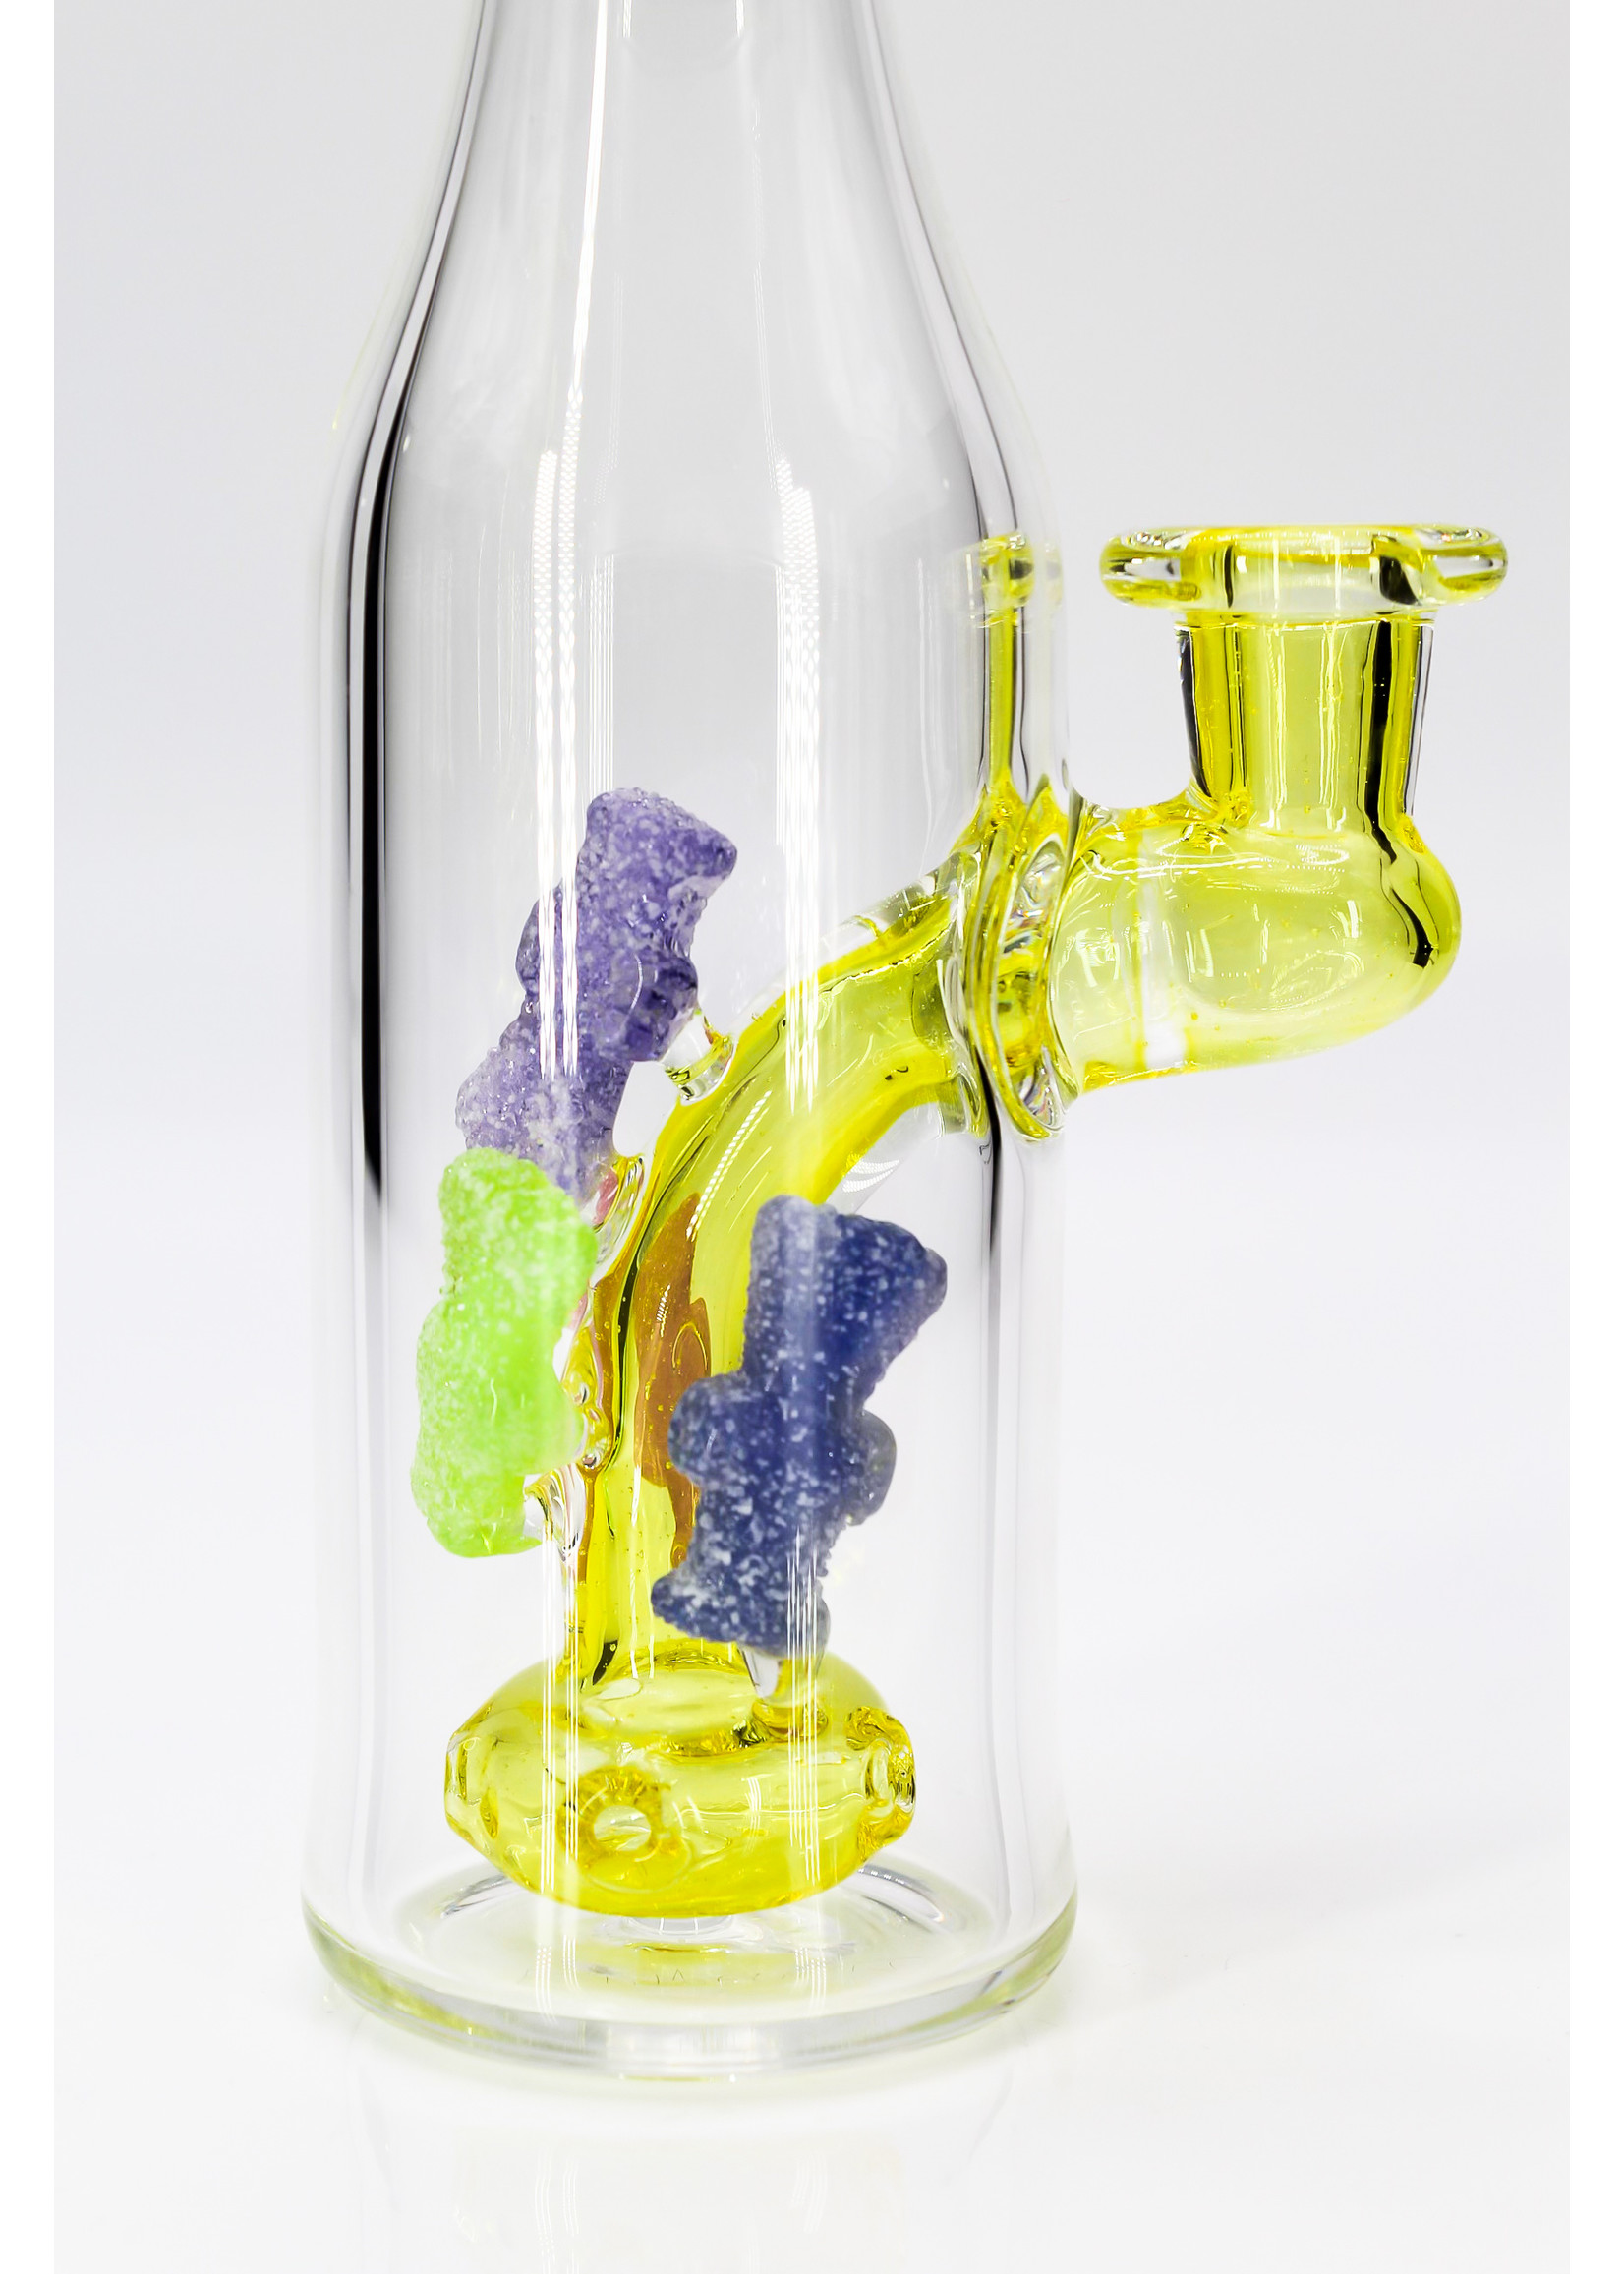 Emperial Glass Emperial Glass Bottle Rig #4 2022